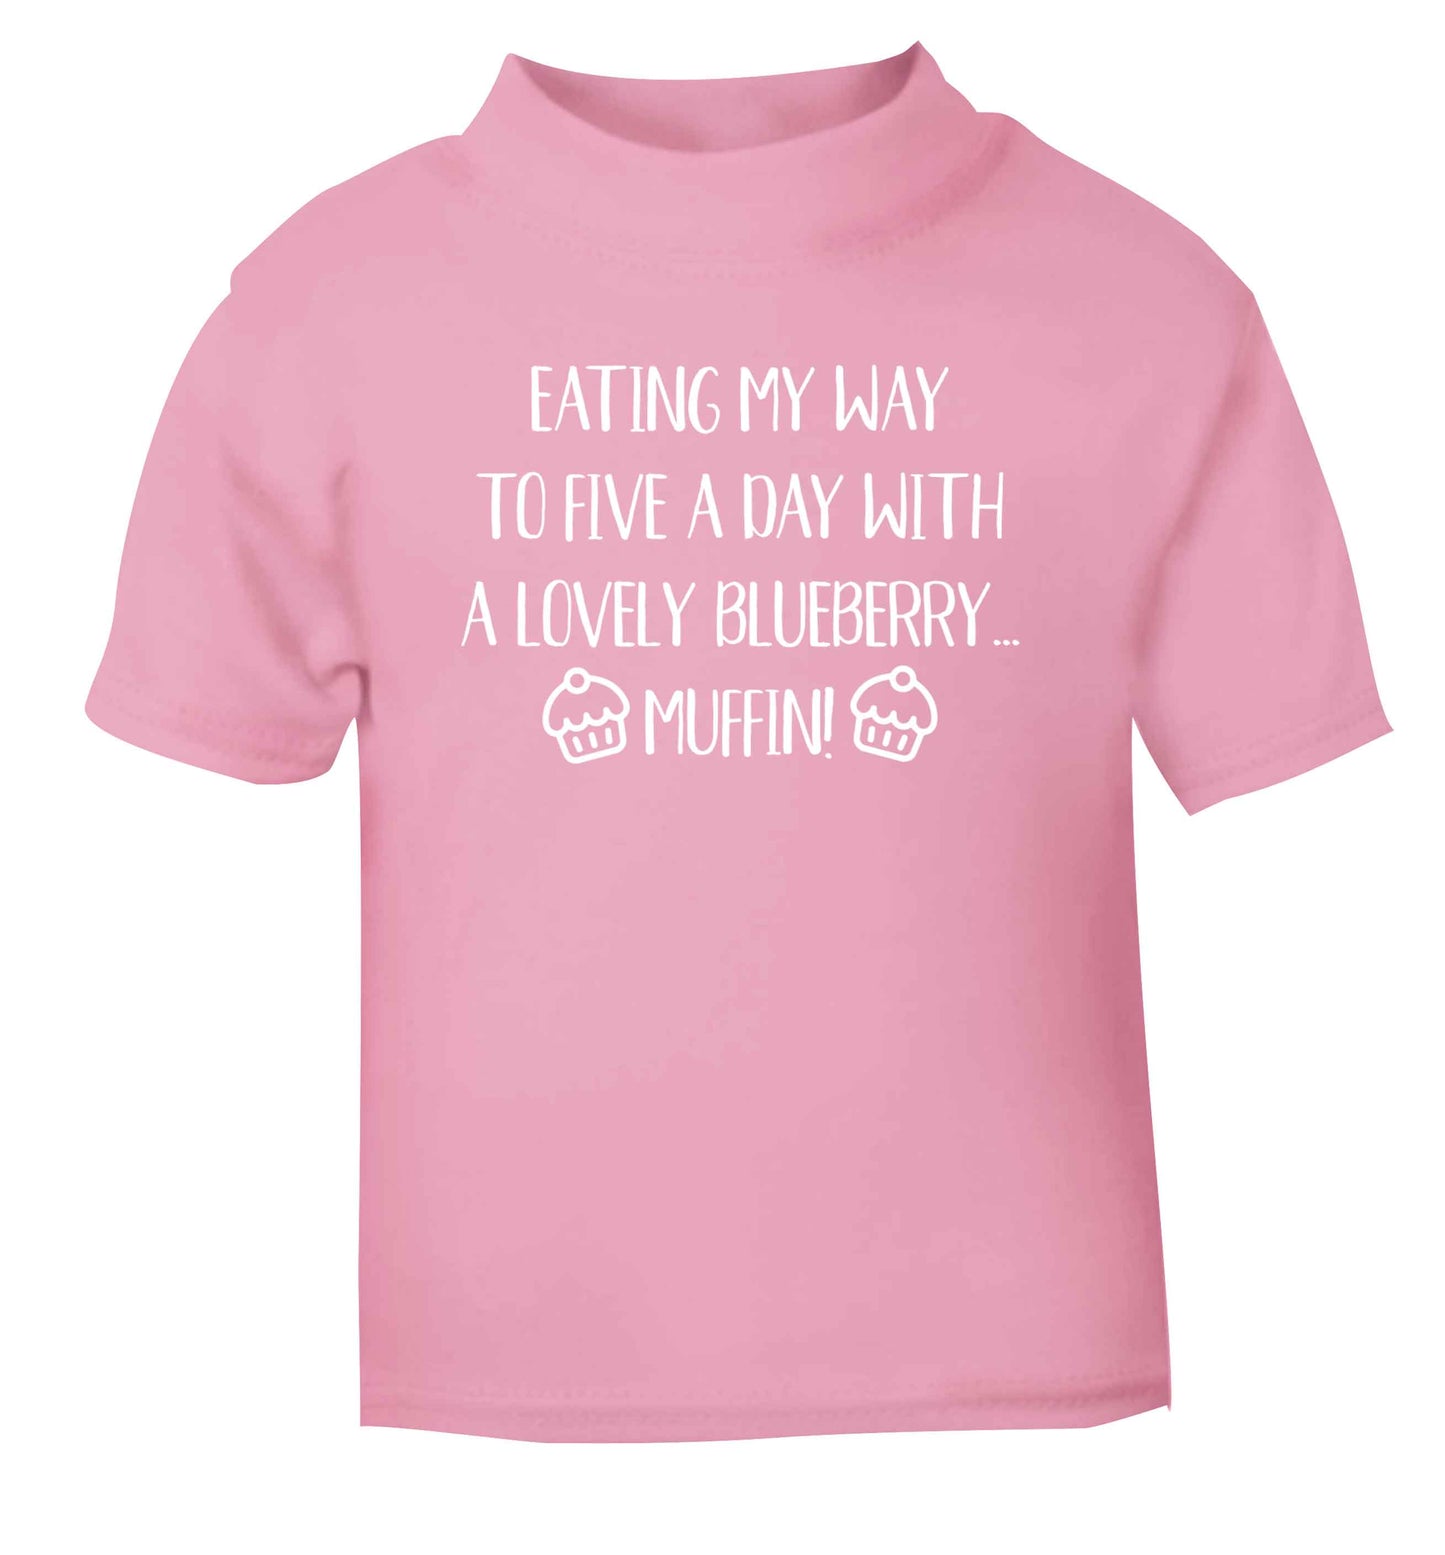 Eating my way to five a day with a lovely blueberry muffin light pink Baby Toddler Tshirt 2 Years